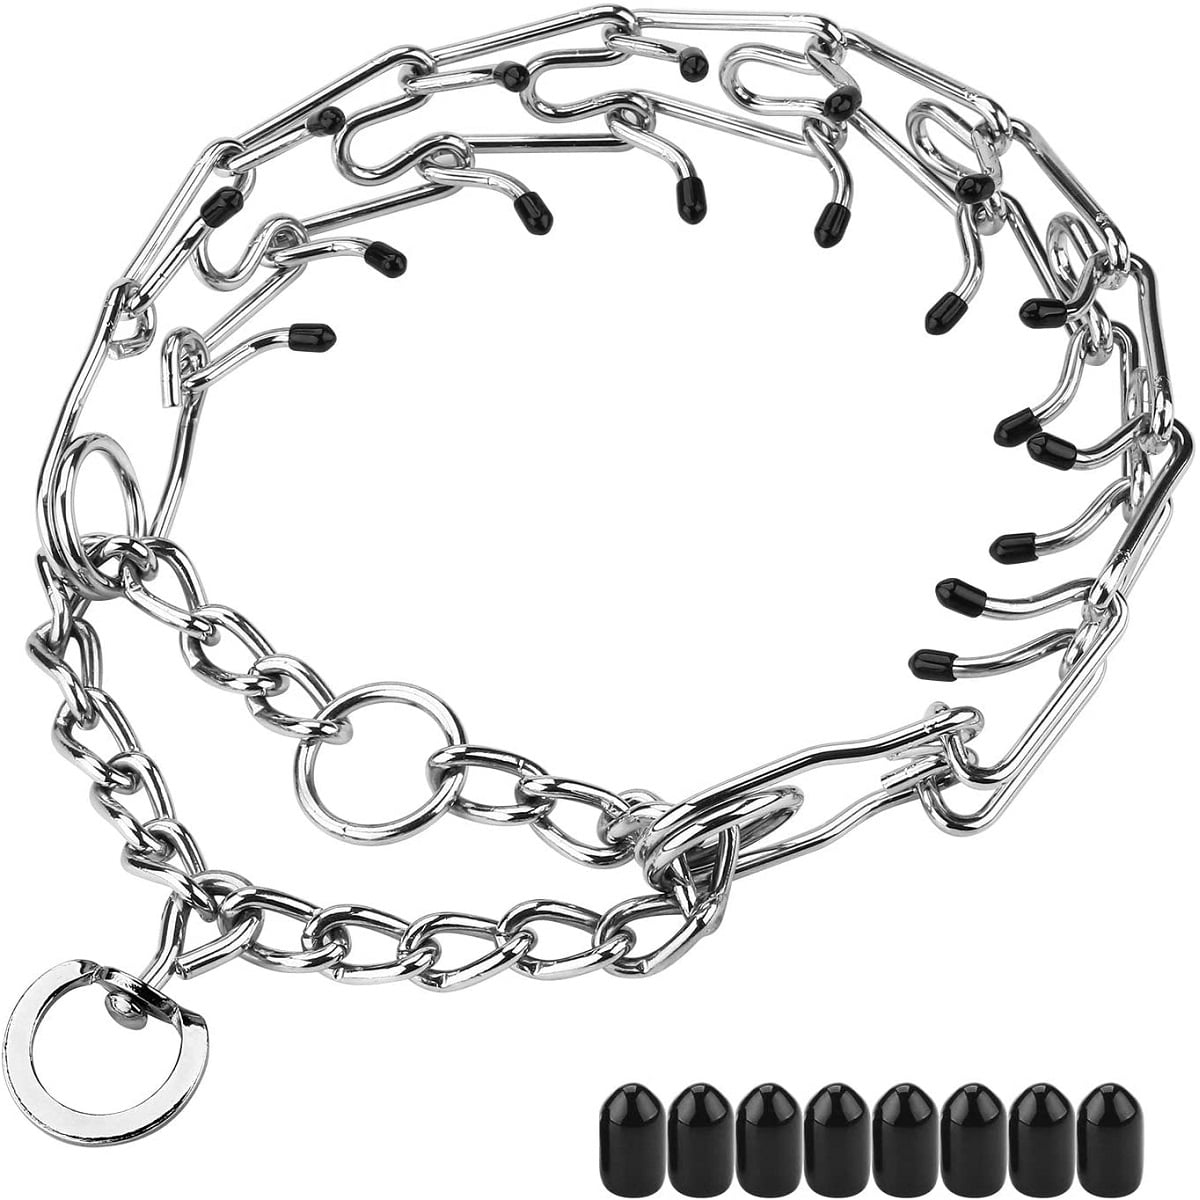 Dog Choke Training Collar 24" With x 2 Swivel D Ring Buckles Steel Chains 